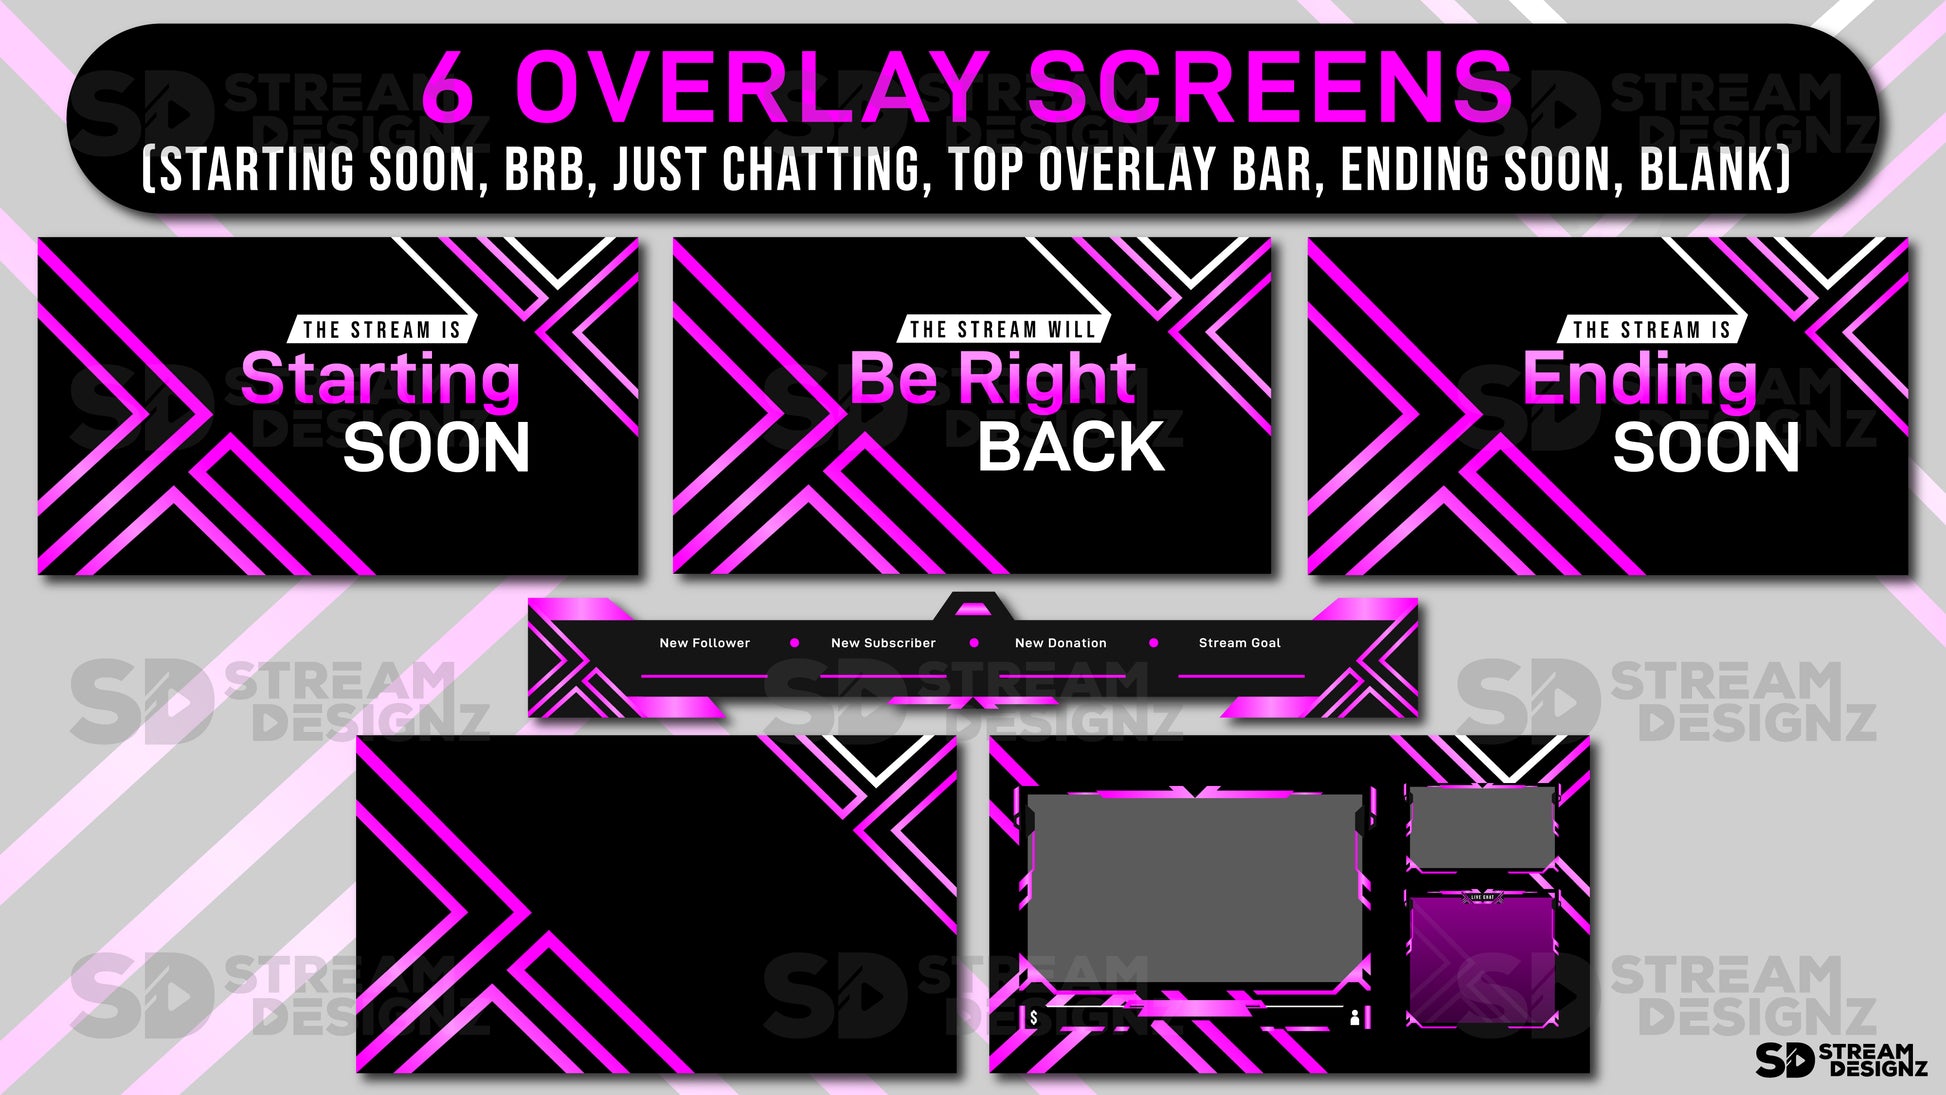 Static stream overlay package pink bliss 6 overlay screens stream designz